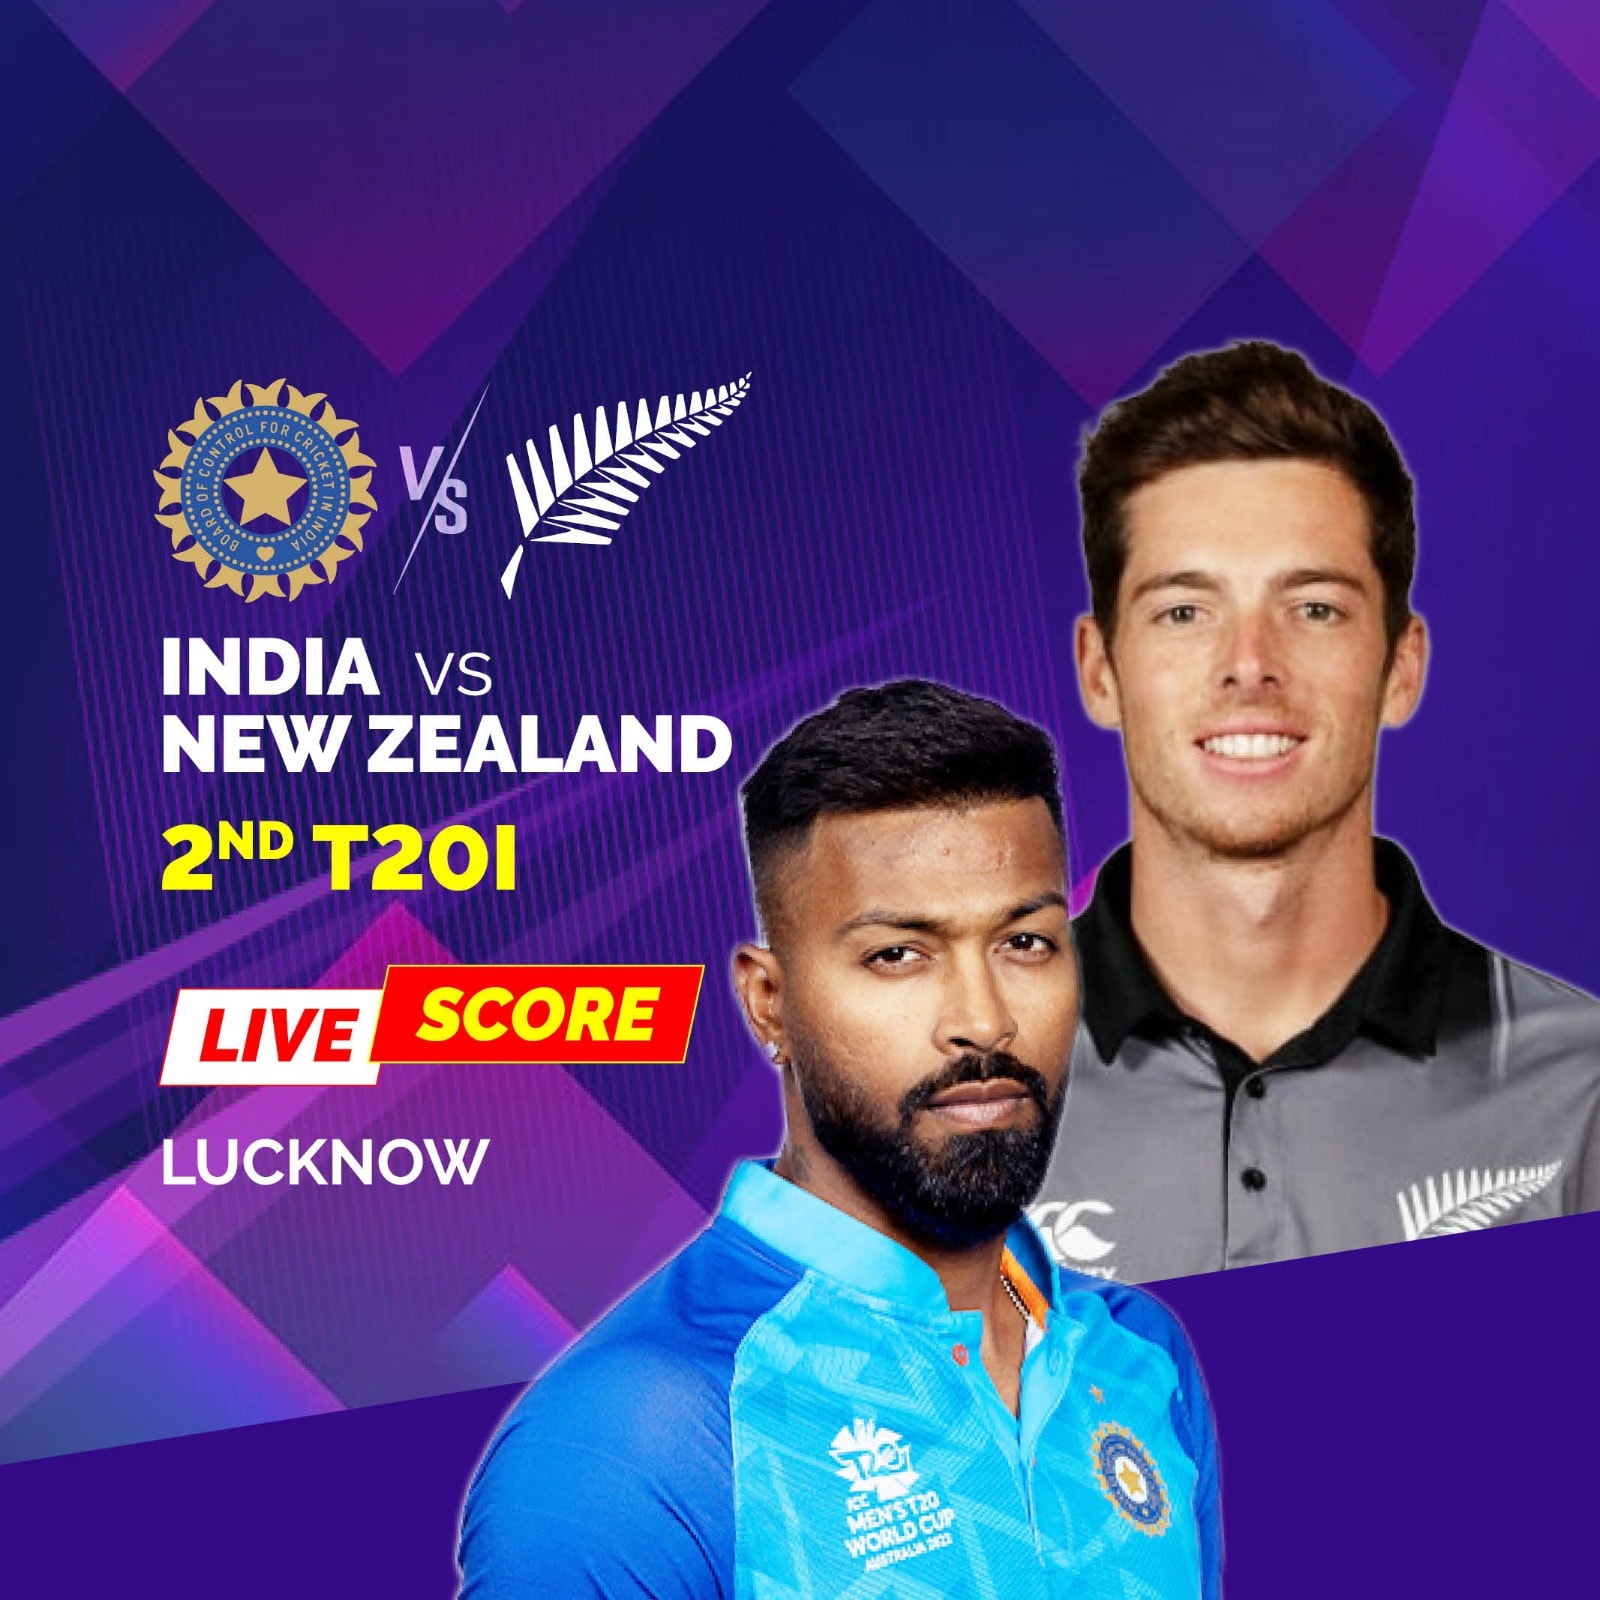 IND vs NZ 2nd T20I Highlights Pandya And Co Register Nervy Win Over New Zealand to Level Series